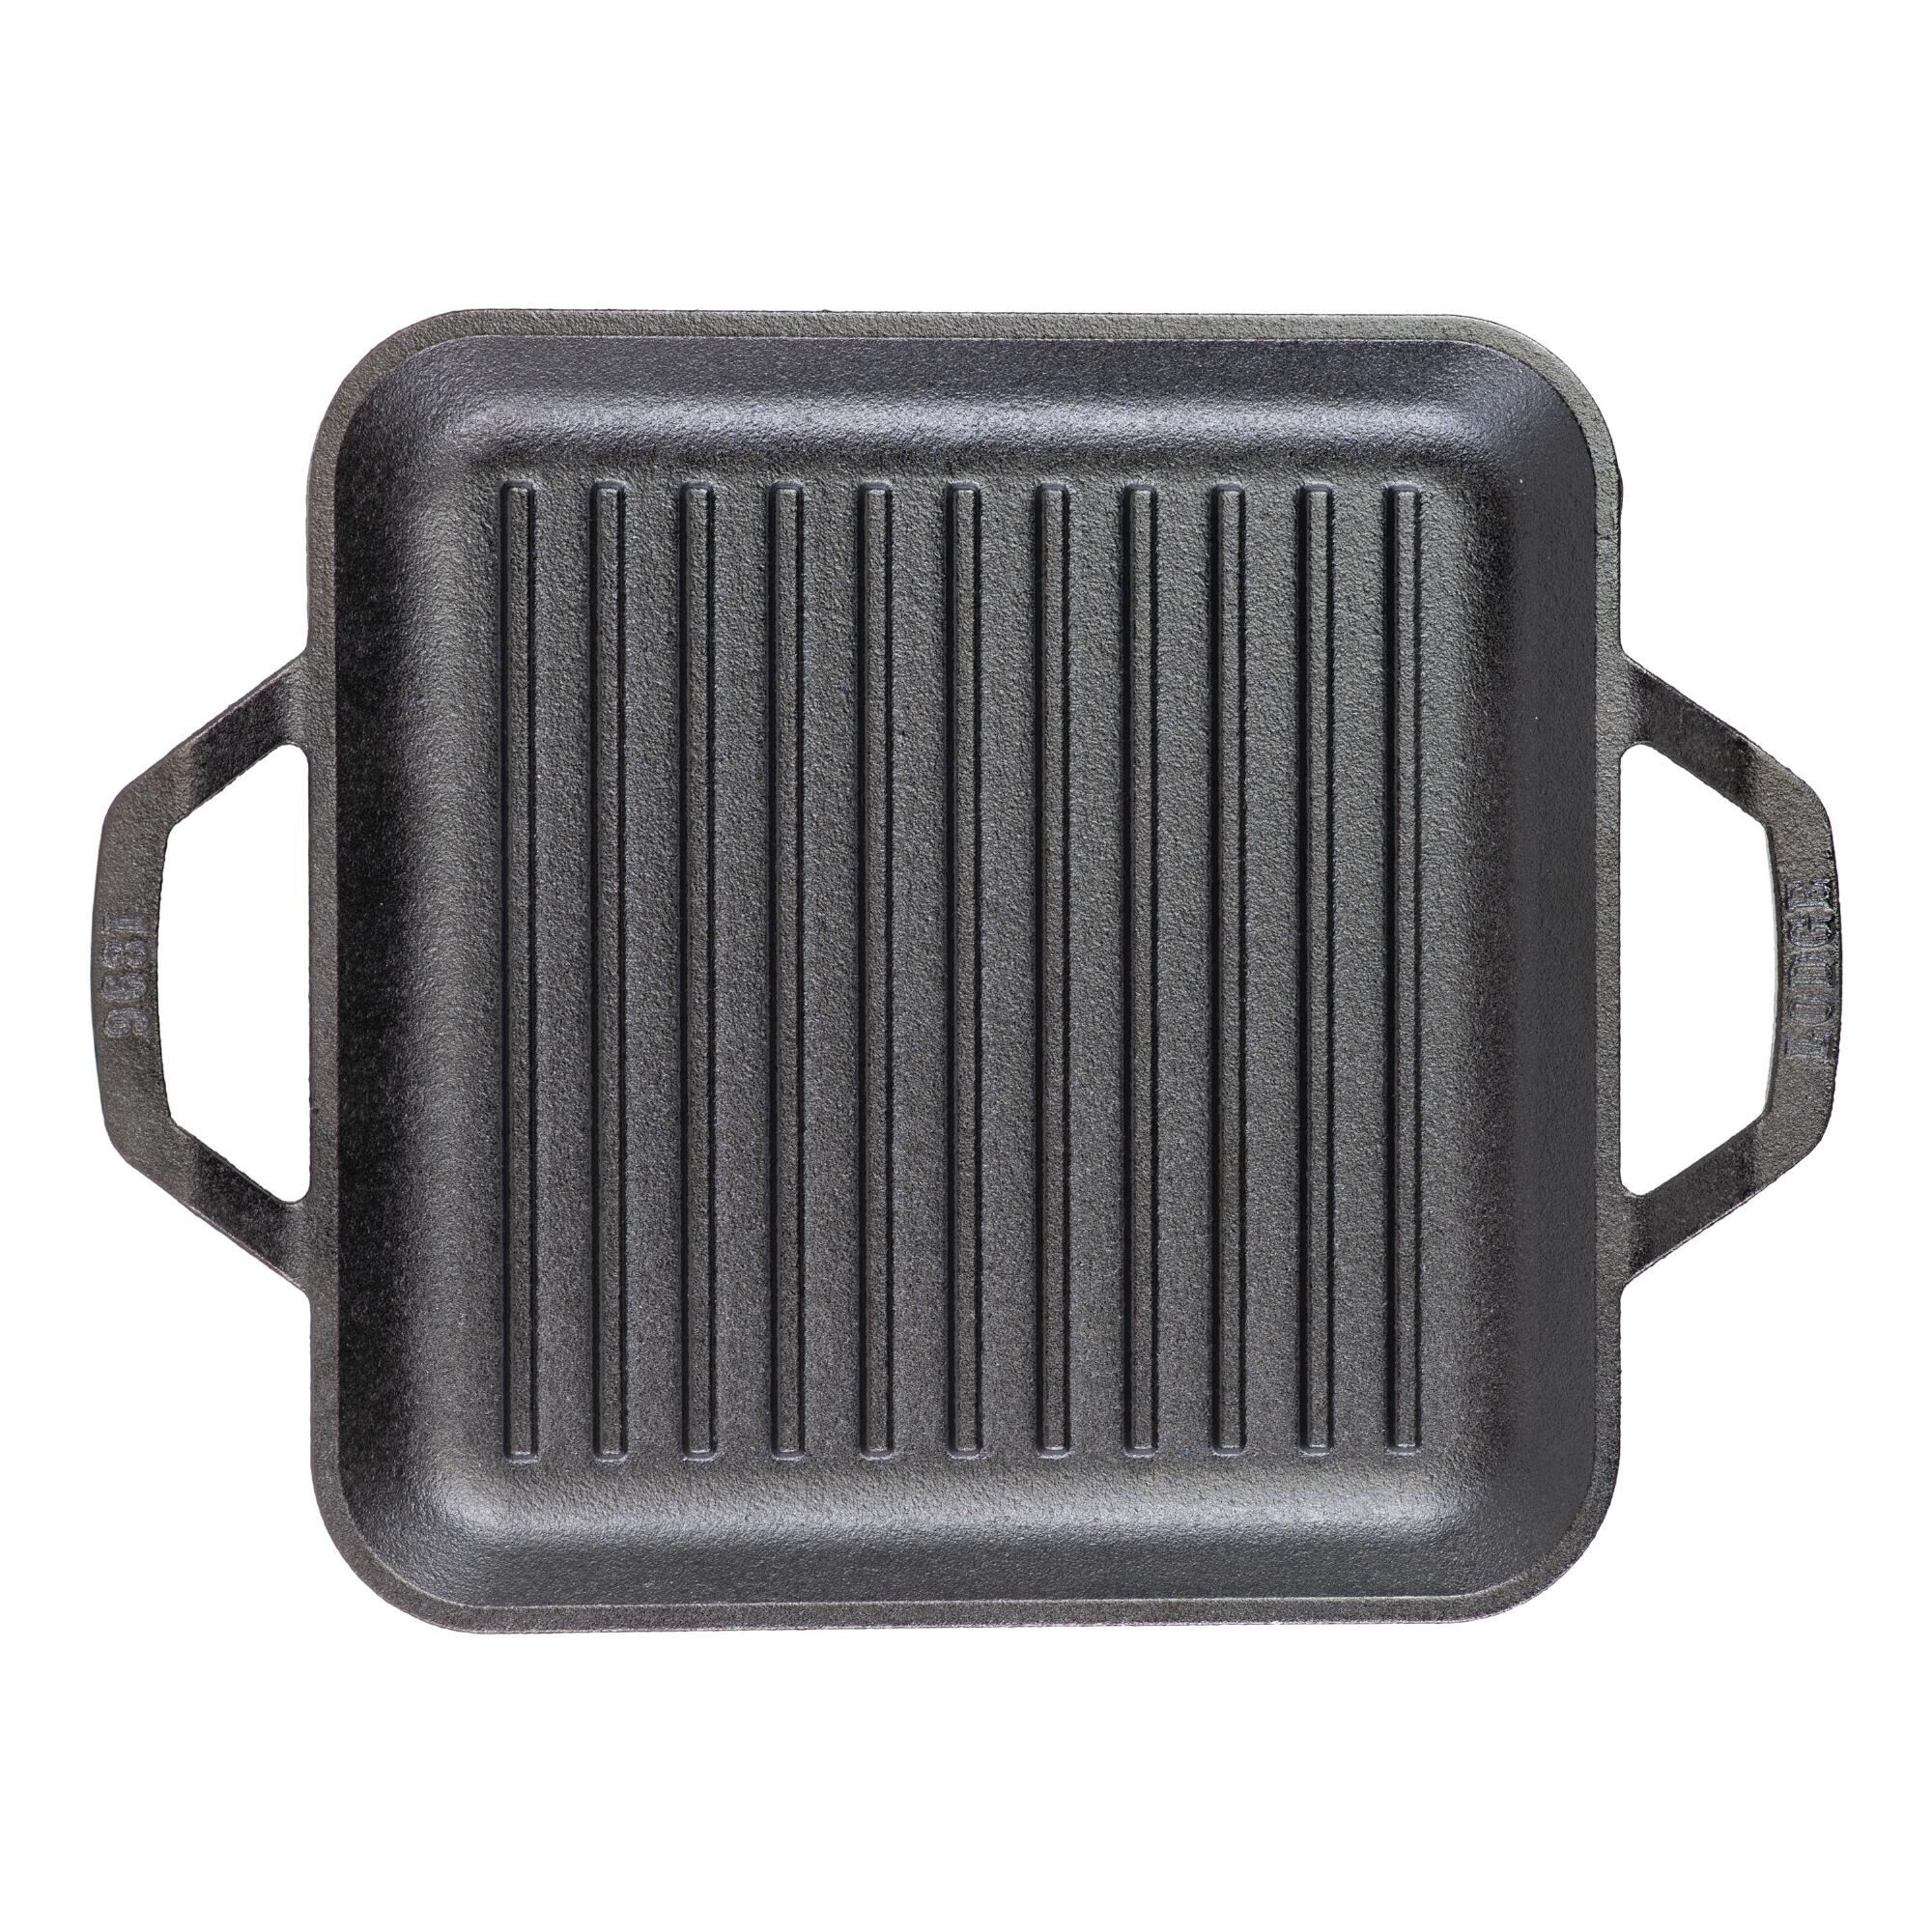 11 Inch Square Lodge Chef Collection Cast Iron Grill Pan by World Market